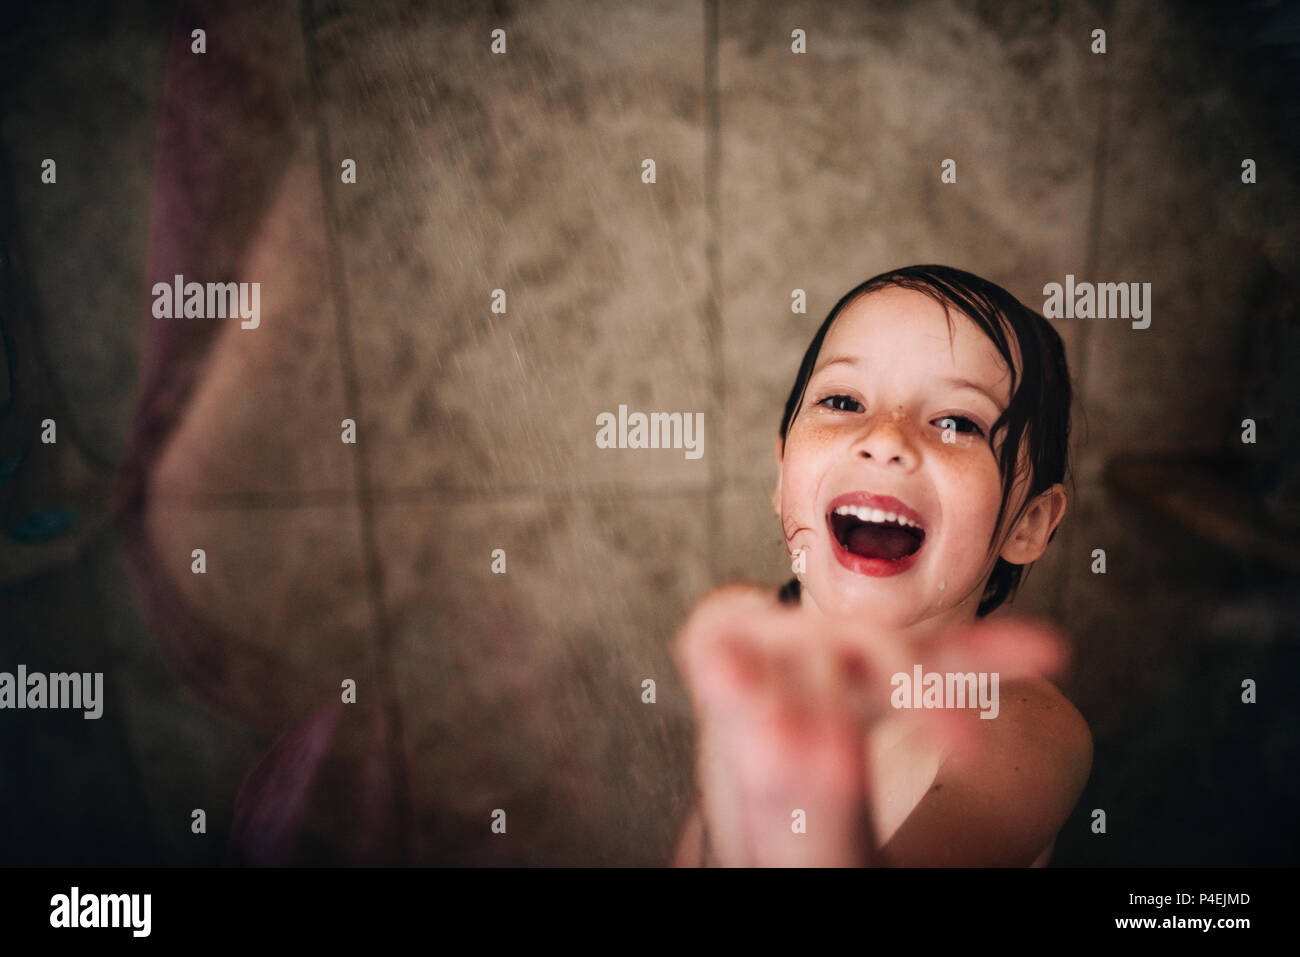 Girl standing in the shower laughing Stock Photo